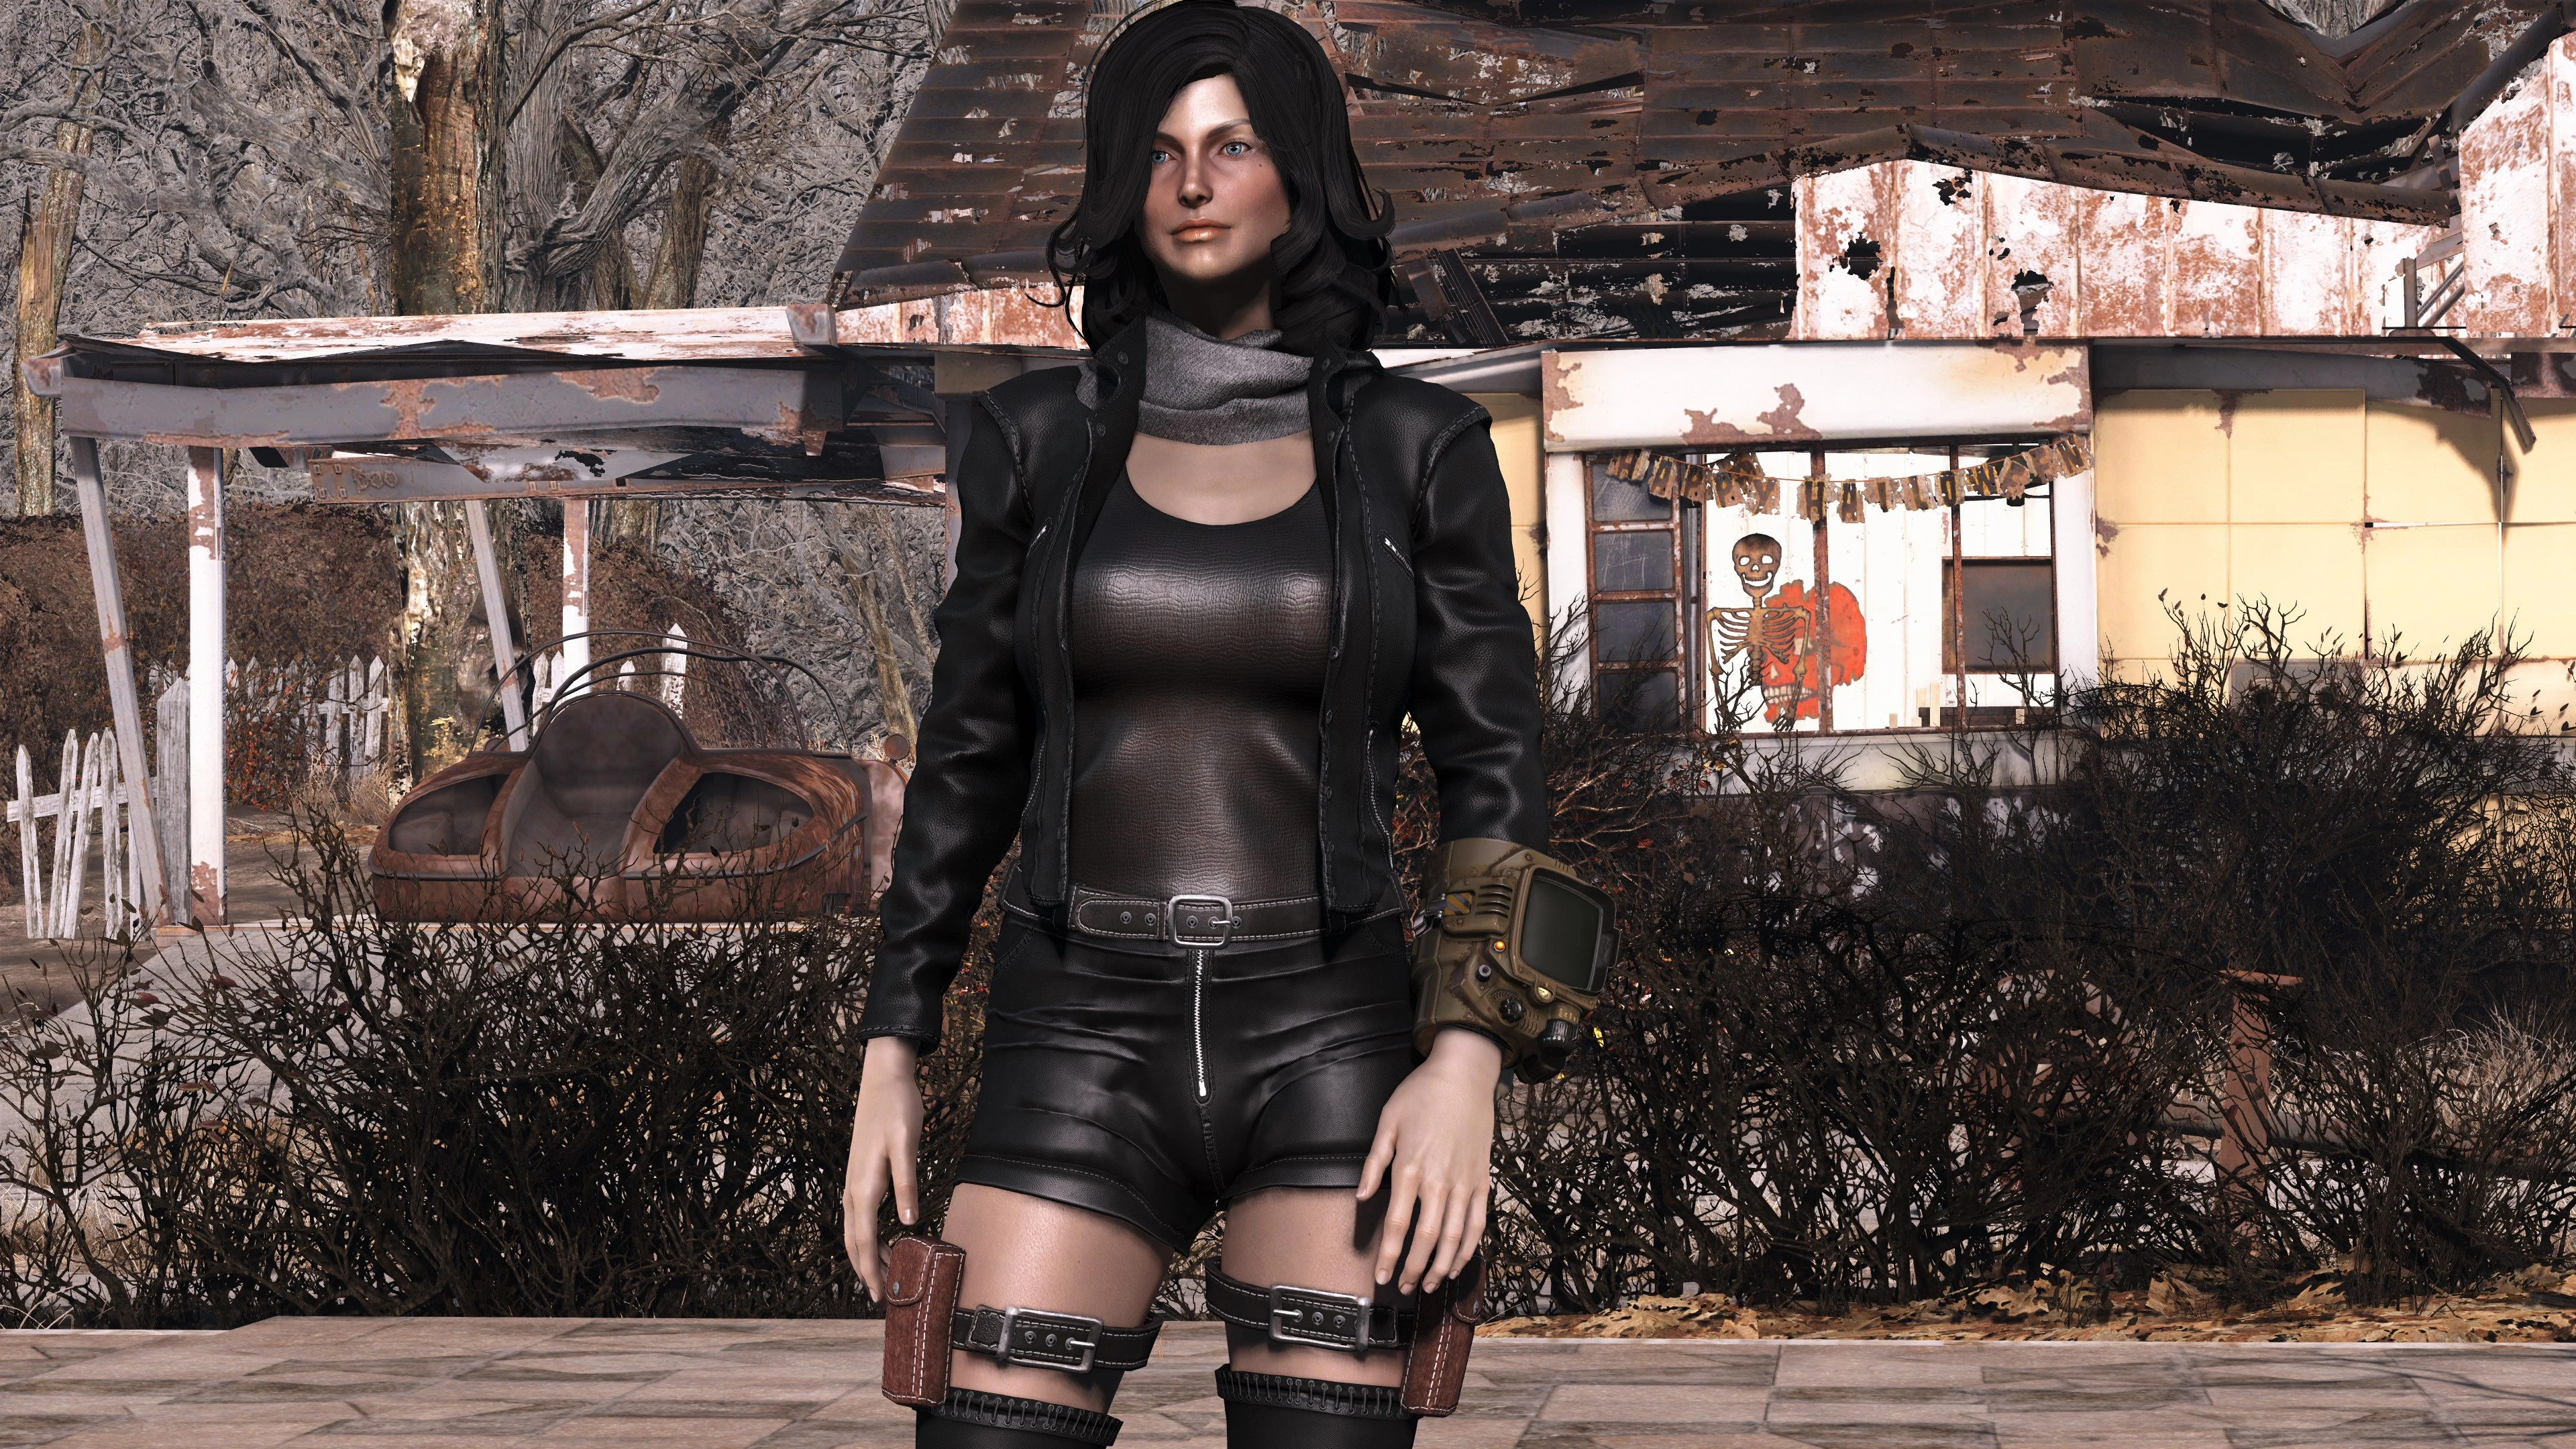 Vtaw workshop fallout 4 clothing armor mods фото 18